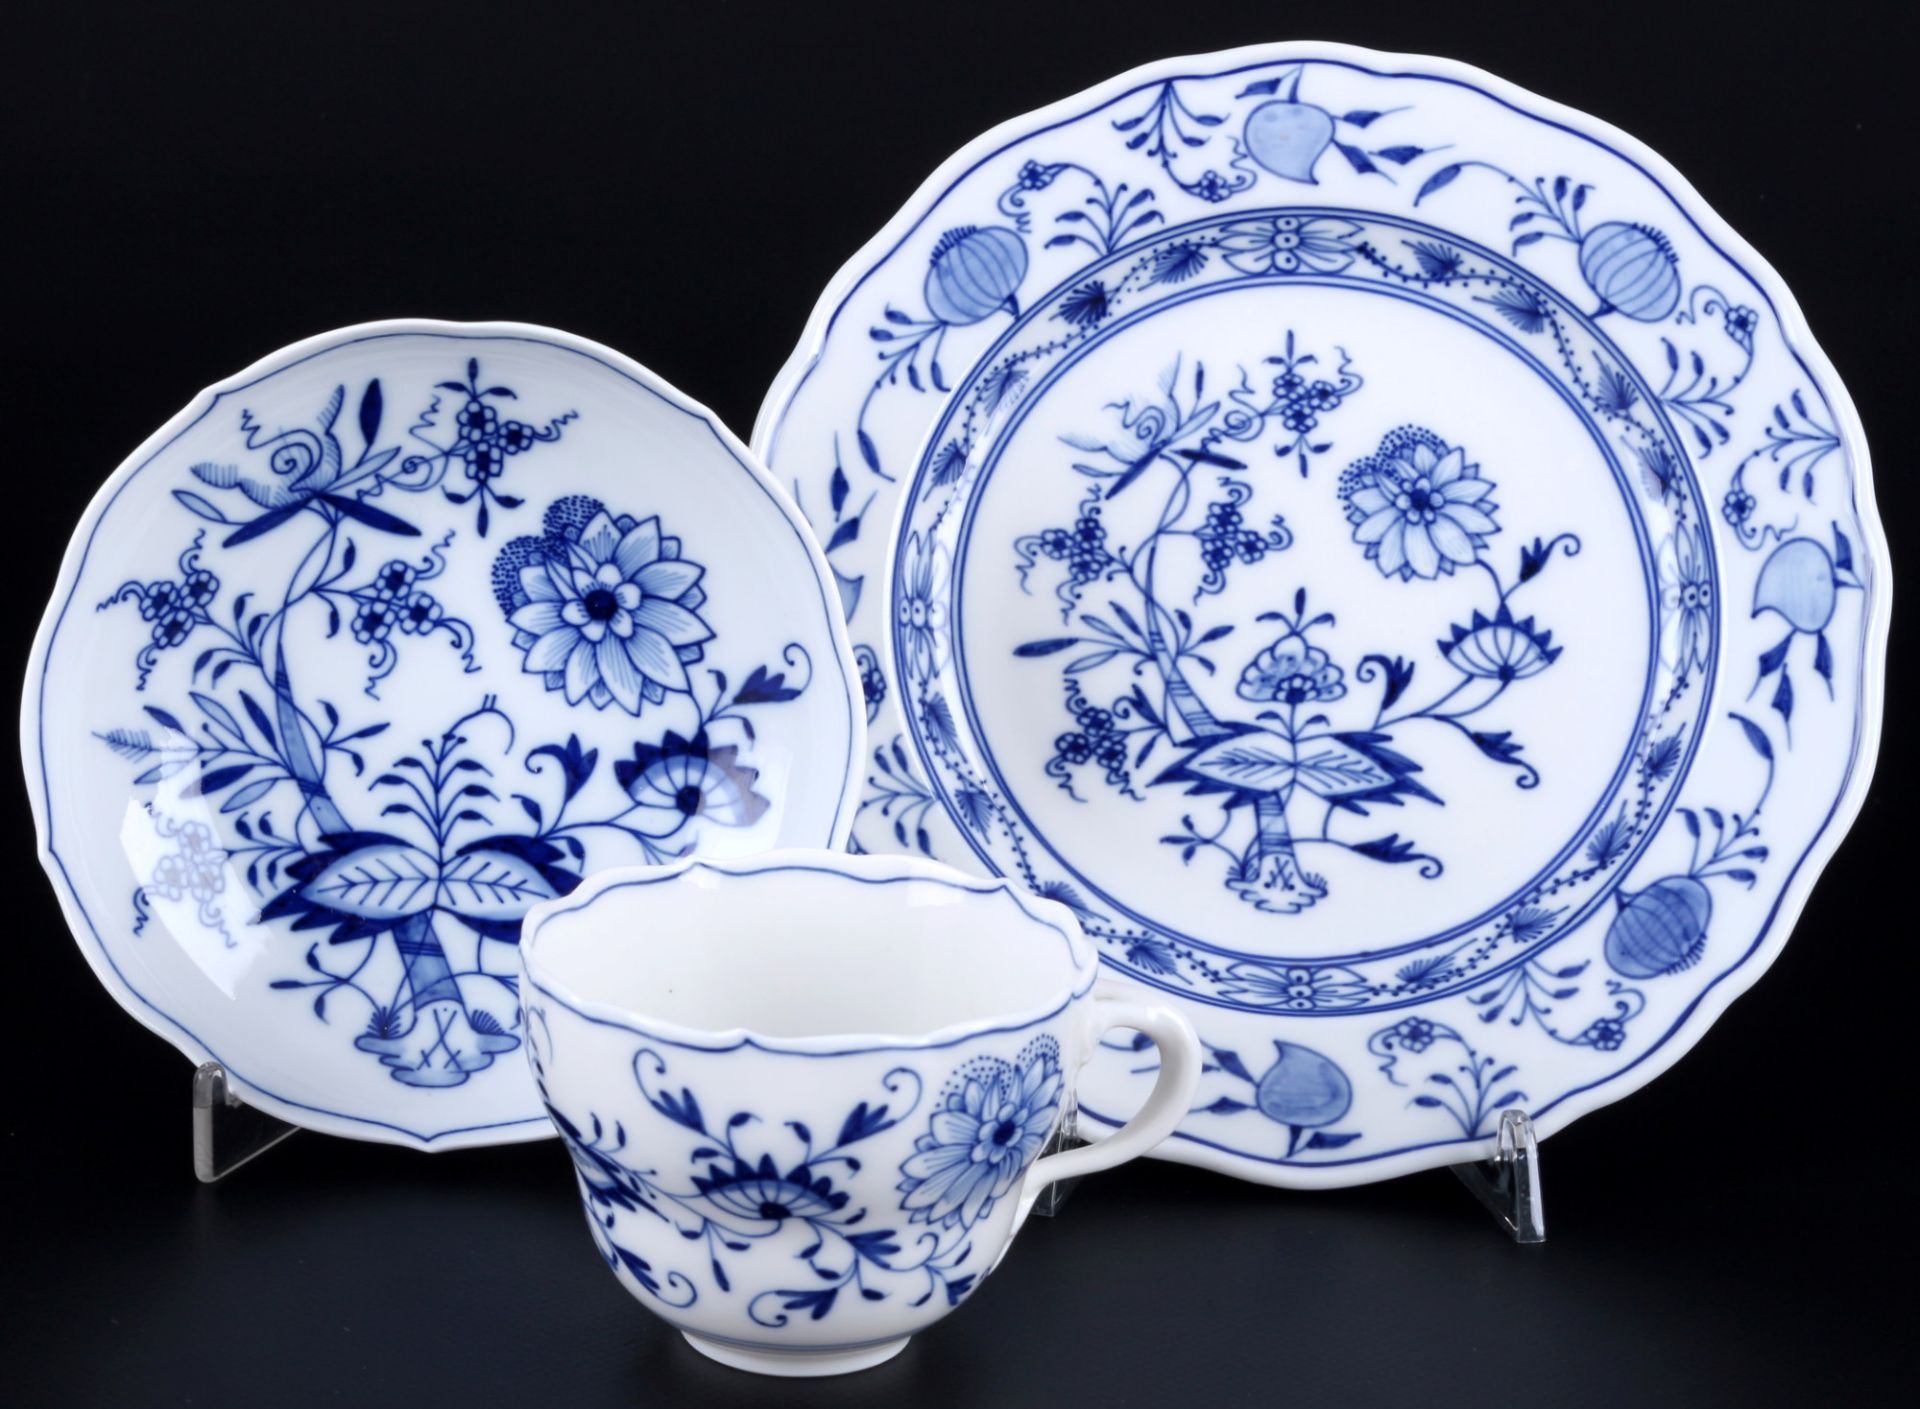 Meissen Onion Pattern coffee service for 6 persons 1st choice, Kaffeeservice für 6 Personen 1.Wahl, - Image 2 of 9